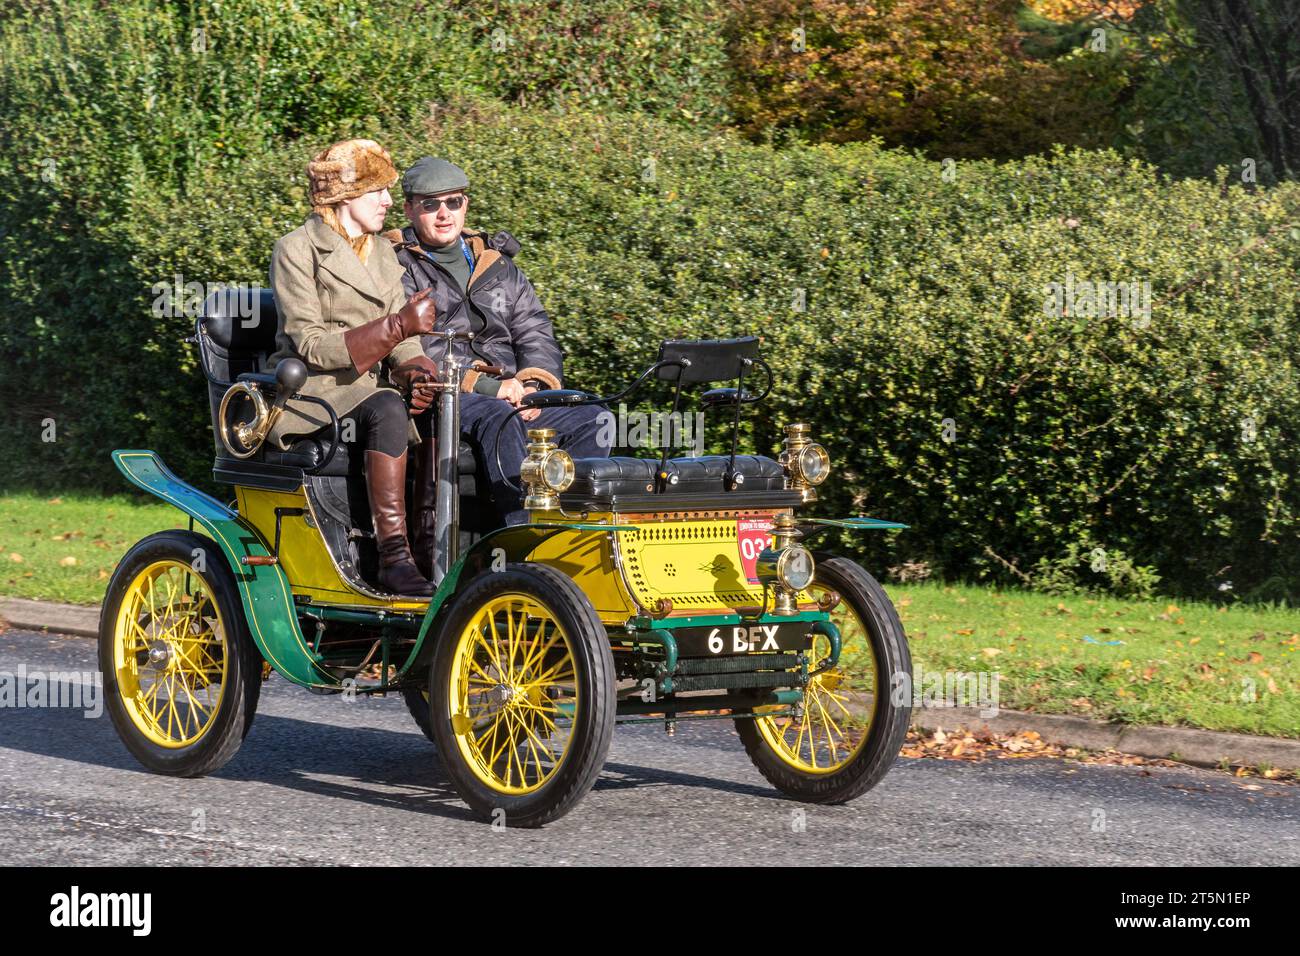 5th November 2023. Participants in the London to Brighton Veteran Car Run 2023 driving through West Sussex, England, UK. The route of the popular annual event is about 60 miles long. Pictured: a yellow and green 1900 De Dion Bouton car on the road, registration number  6 BFX. Stock Photo